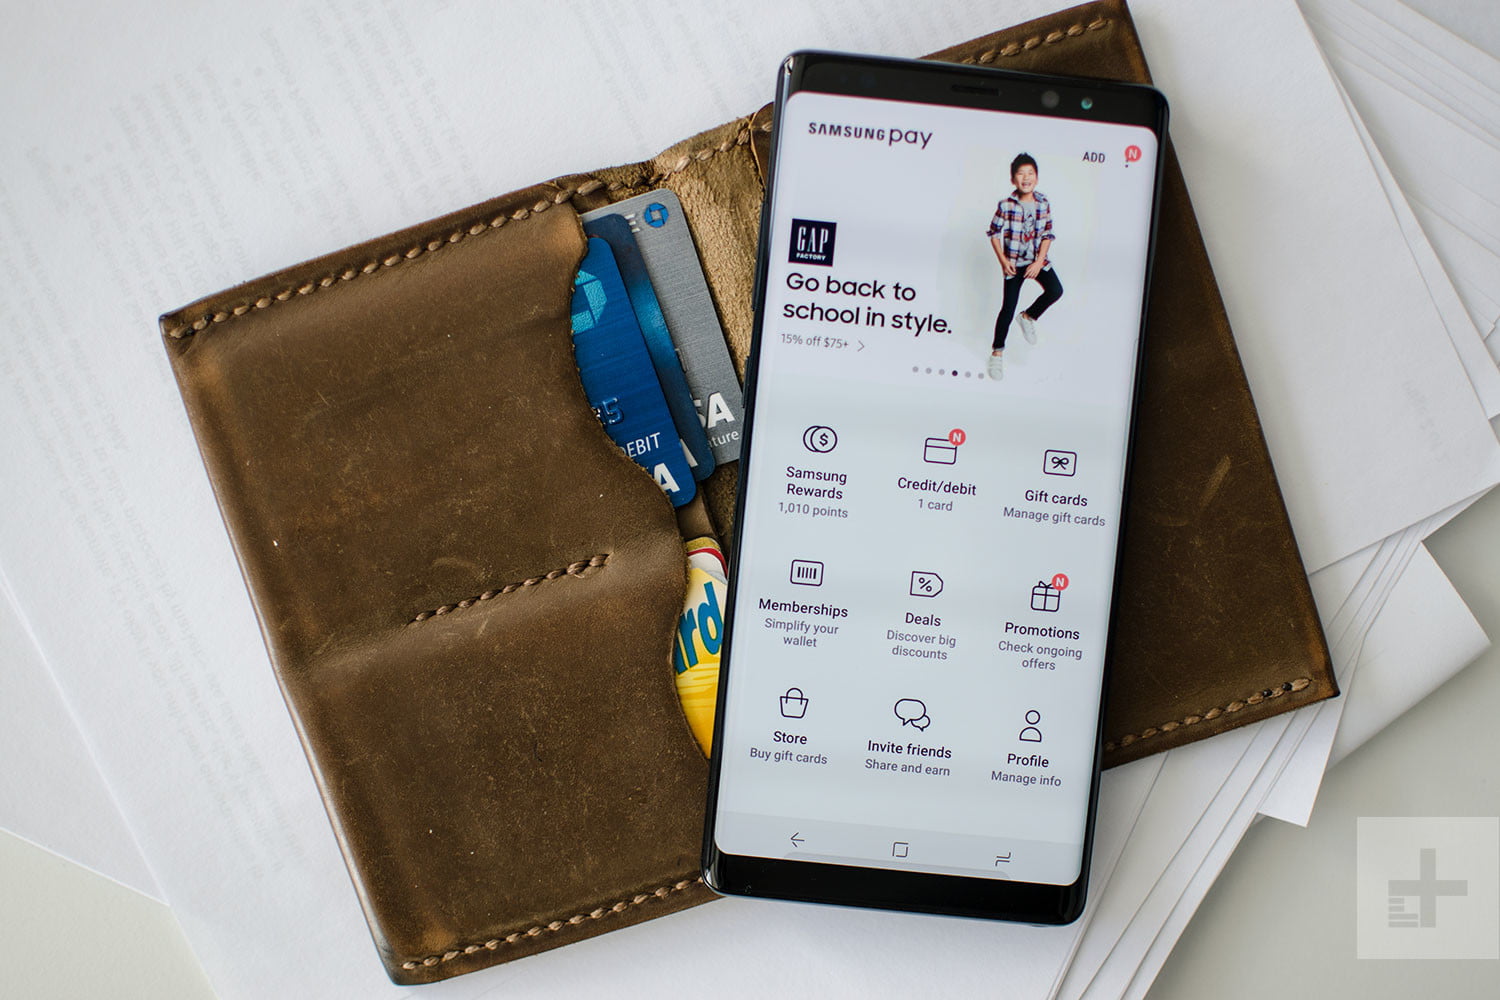 Samsung Pay will get overhaul with new Samsung Pockets app | Virtual Traits